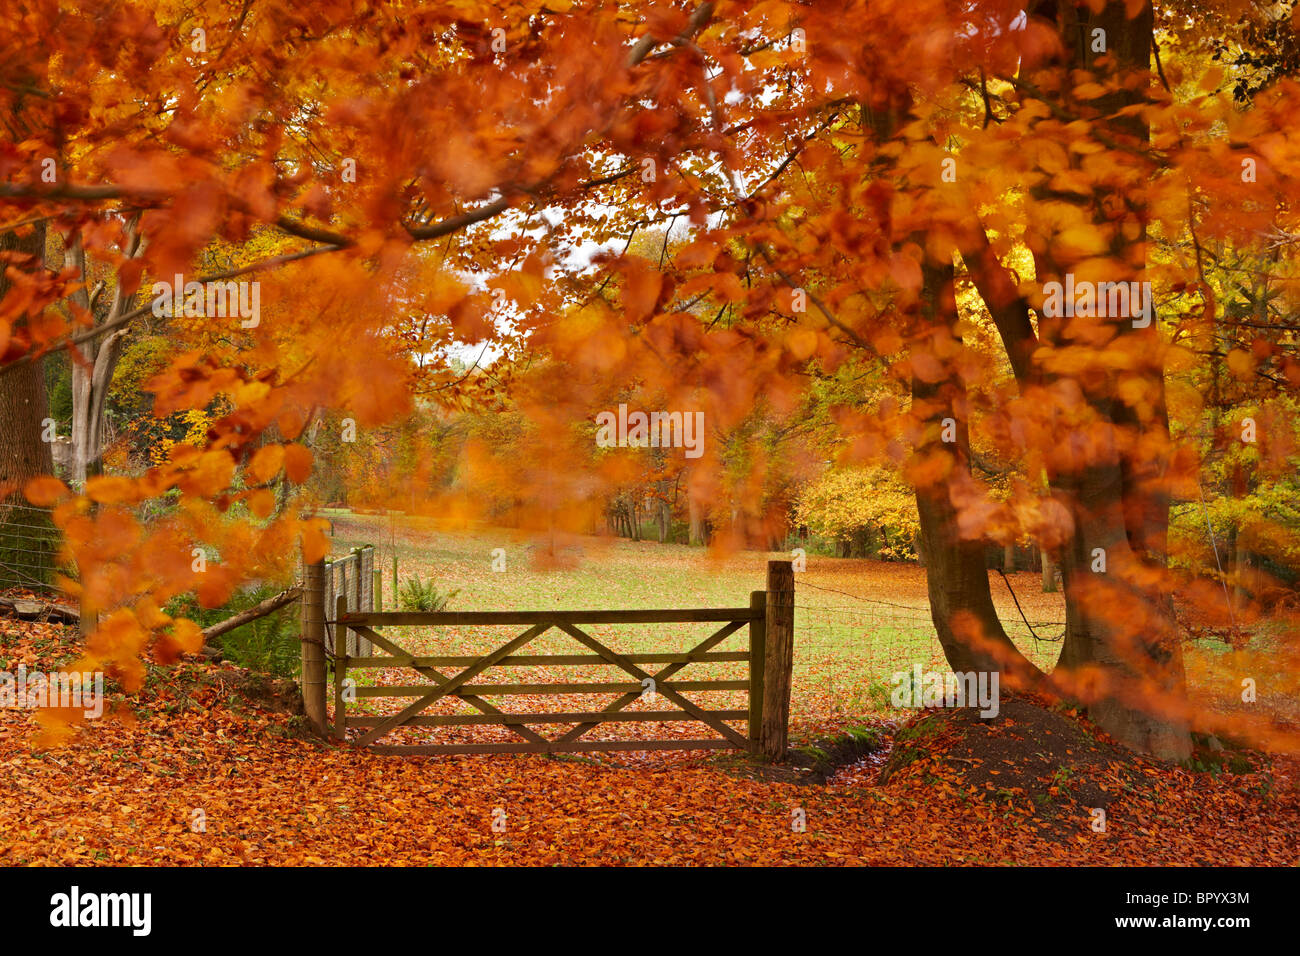 A gate framed by an Autumn beech tree blowing in the wind. Stock Photo